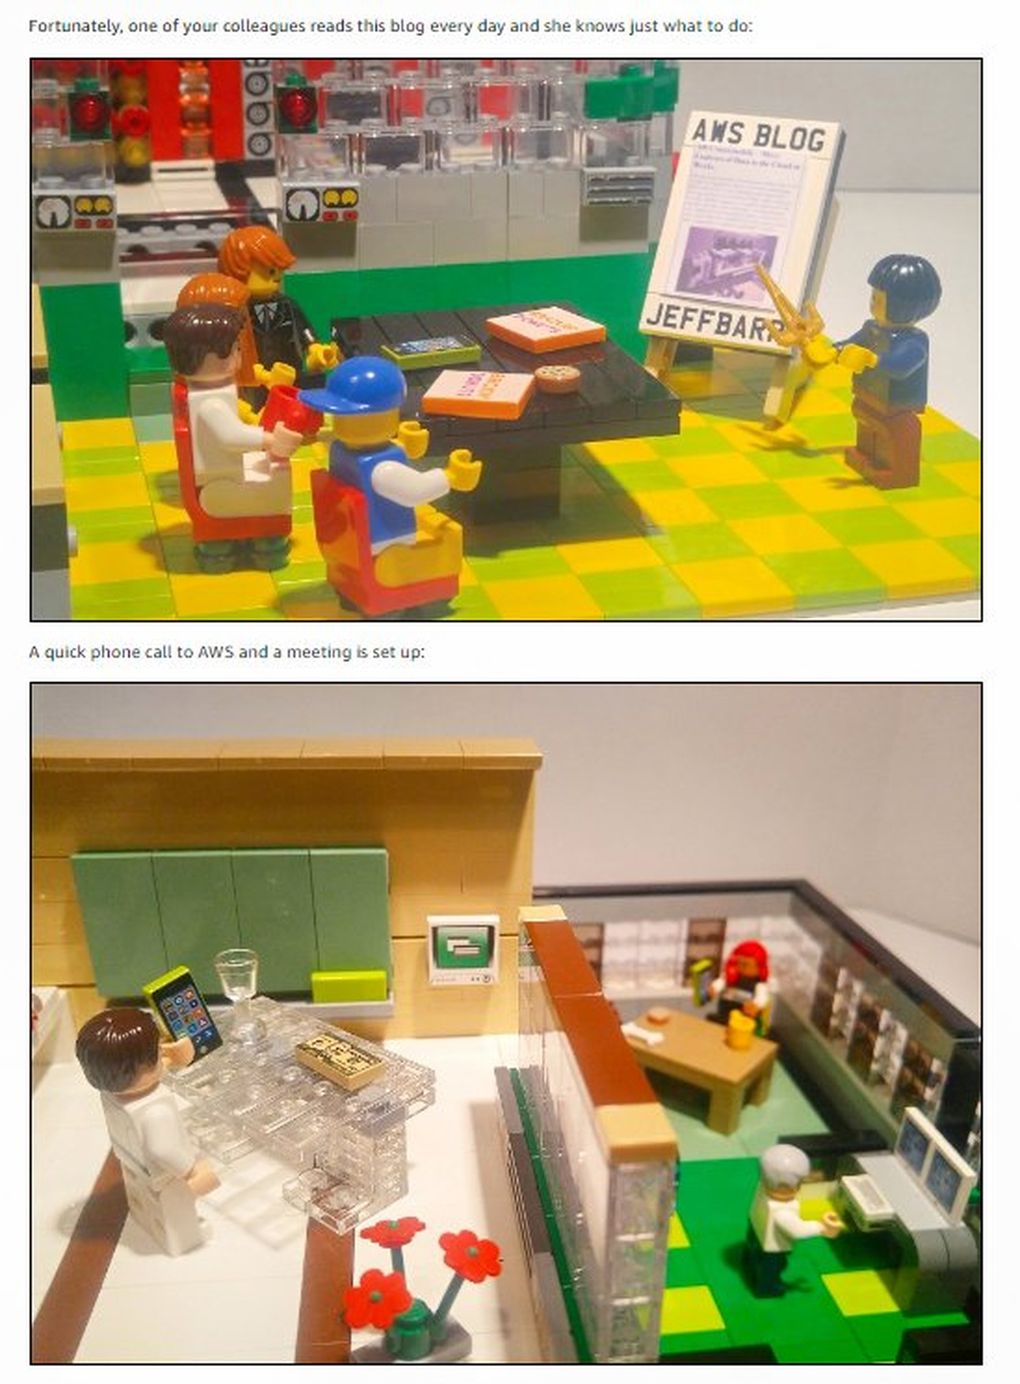 Amazonians often compare AWS to Legos, saying the system provides building blocks for developers. AWS Chief Evangelist Jeff Barr, a noted Lego fan, made the metaphor literal in a blog post using intricate Lego dioramas to illustrate a new AWS feature. (Courtesy of Amazon / Jeff Barr and Matt Guttierez)